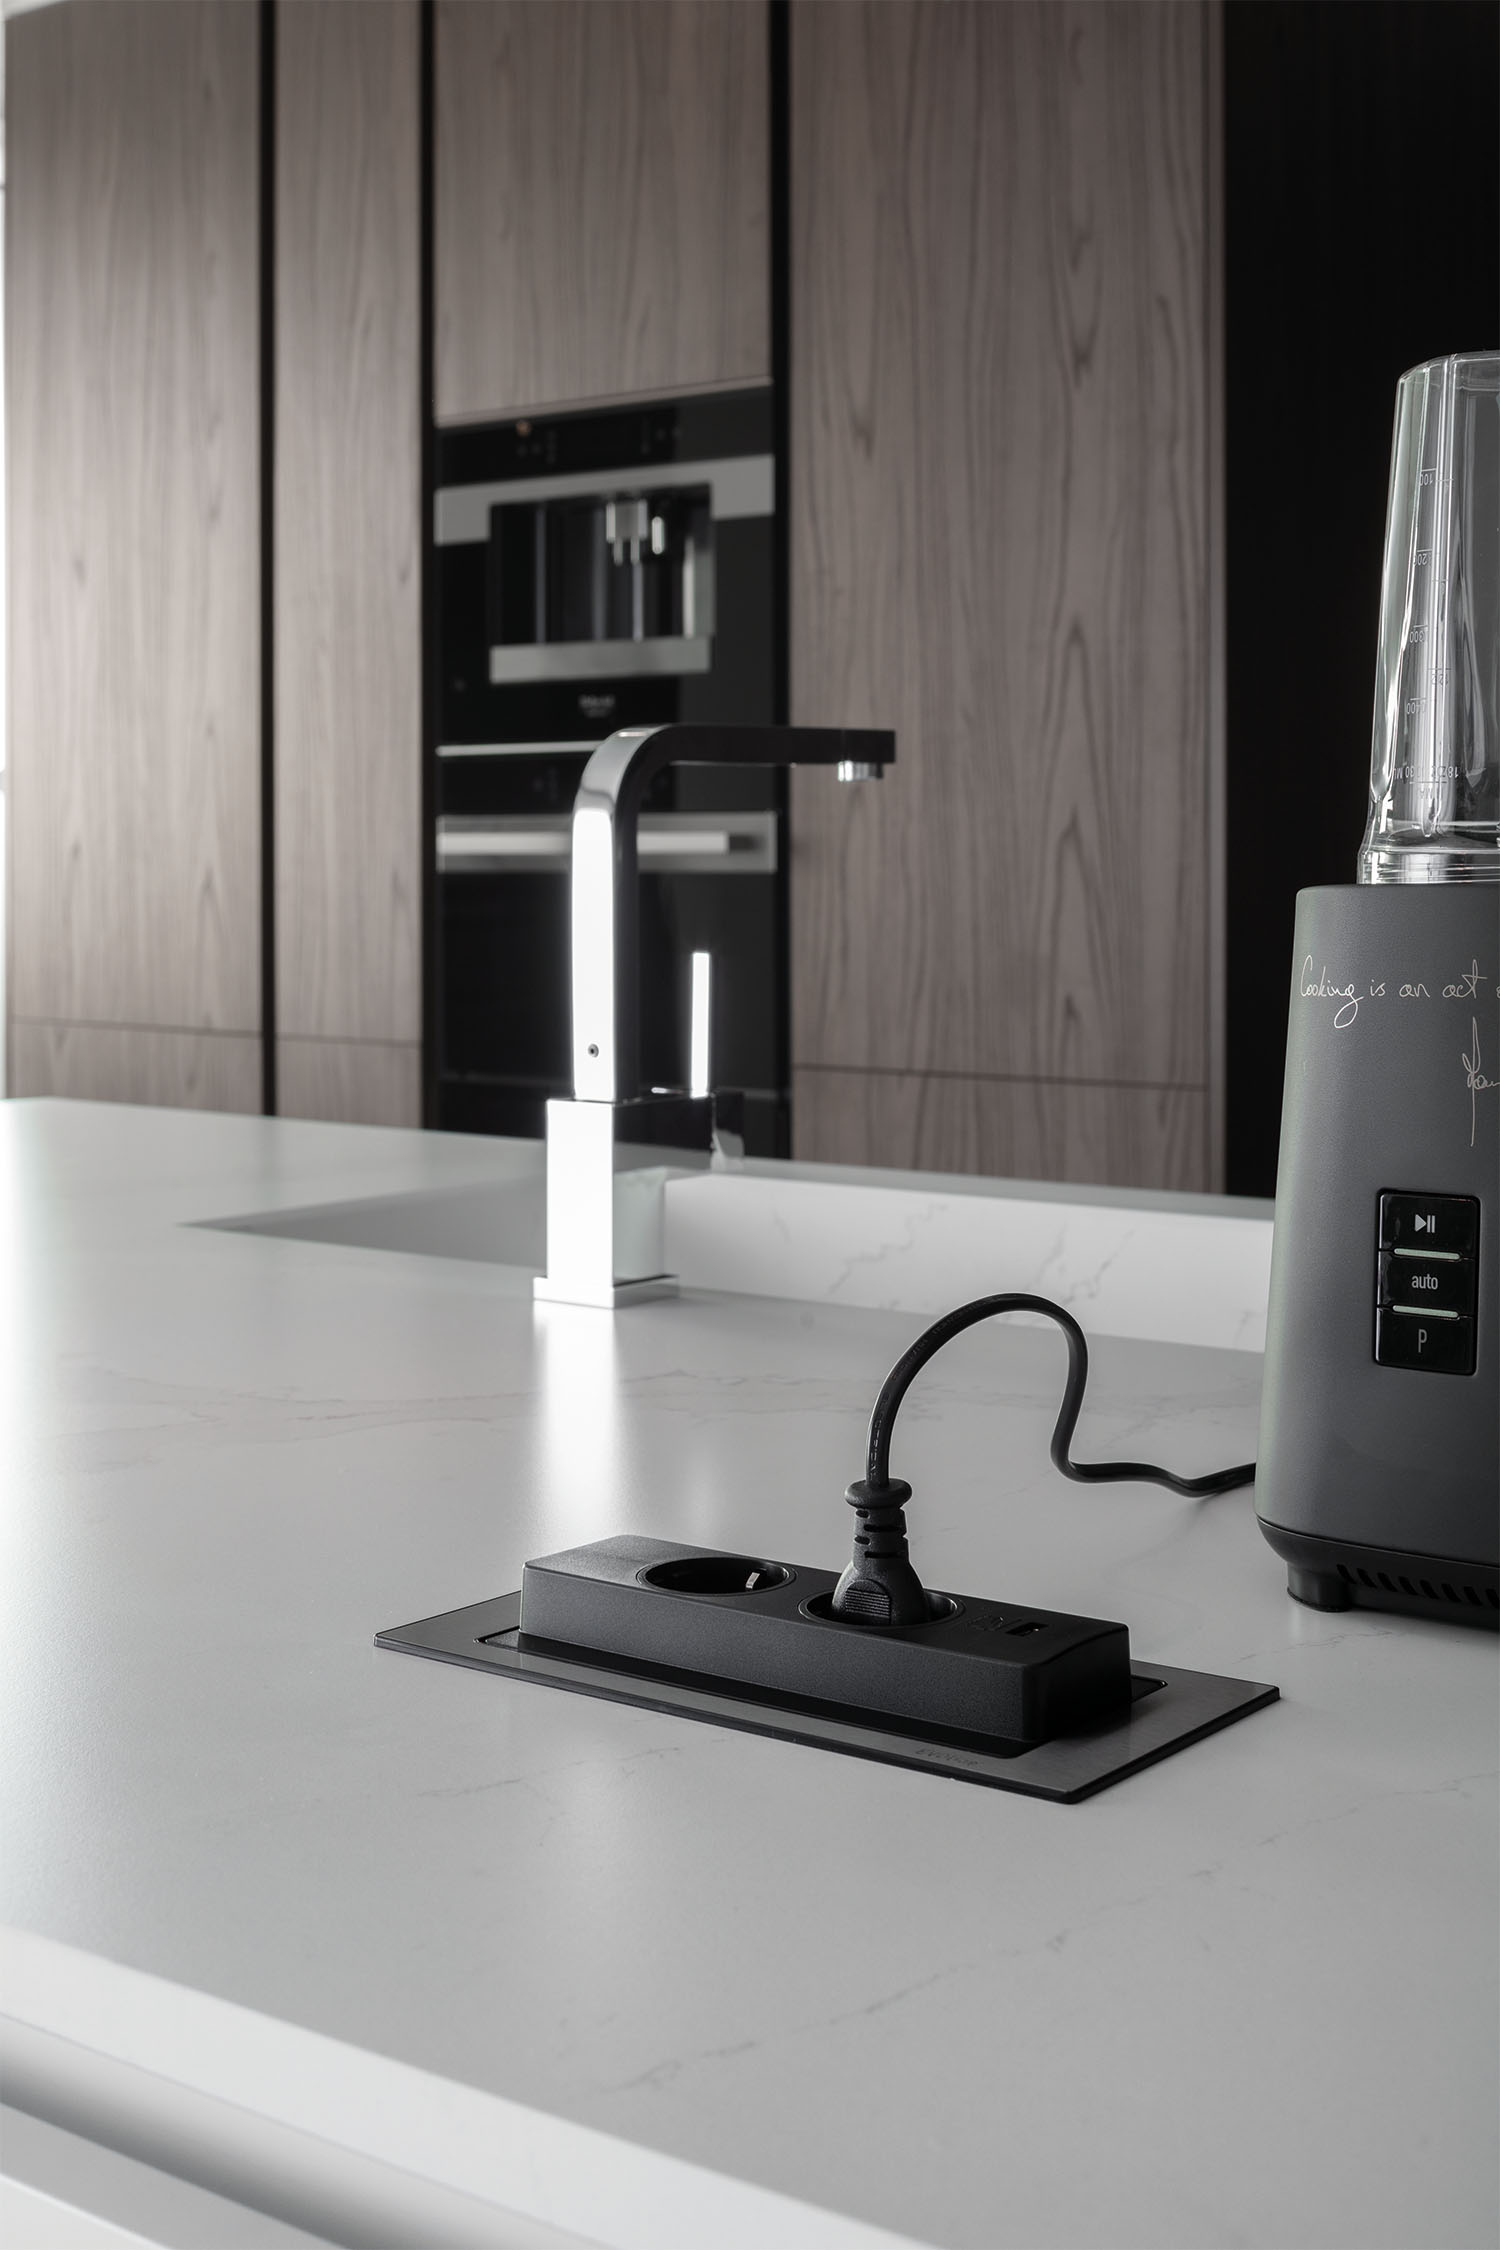 The seamless kitchen aesthetic is continued using Evoline power sockets, enabling power only when necessary.